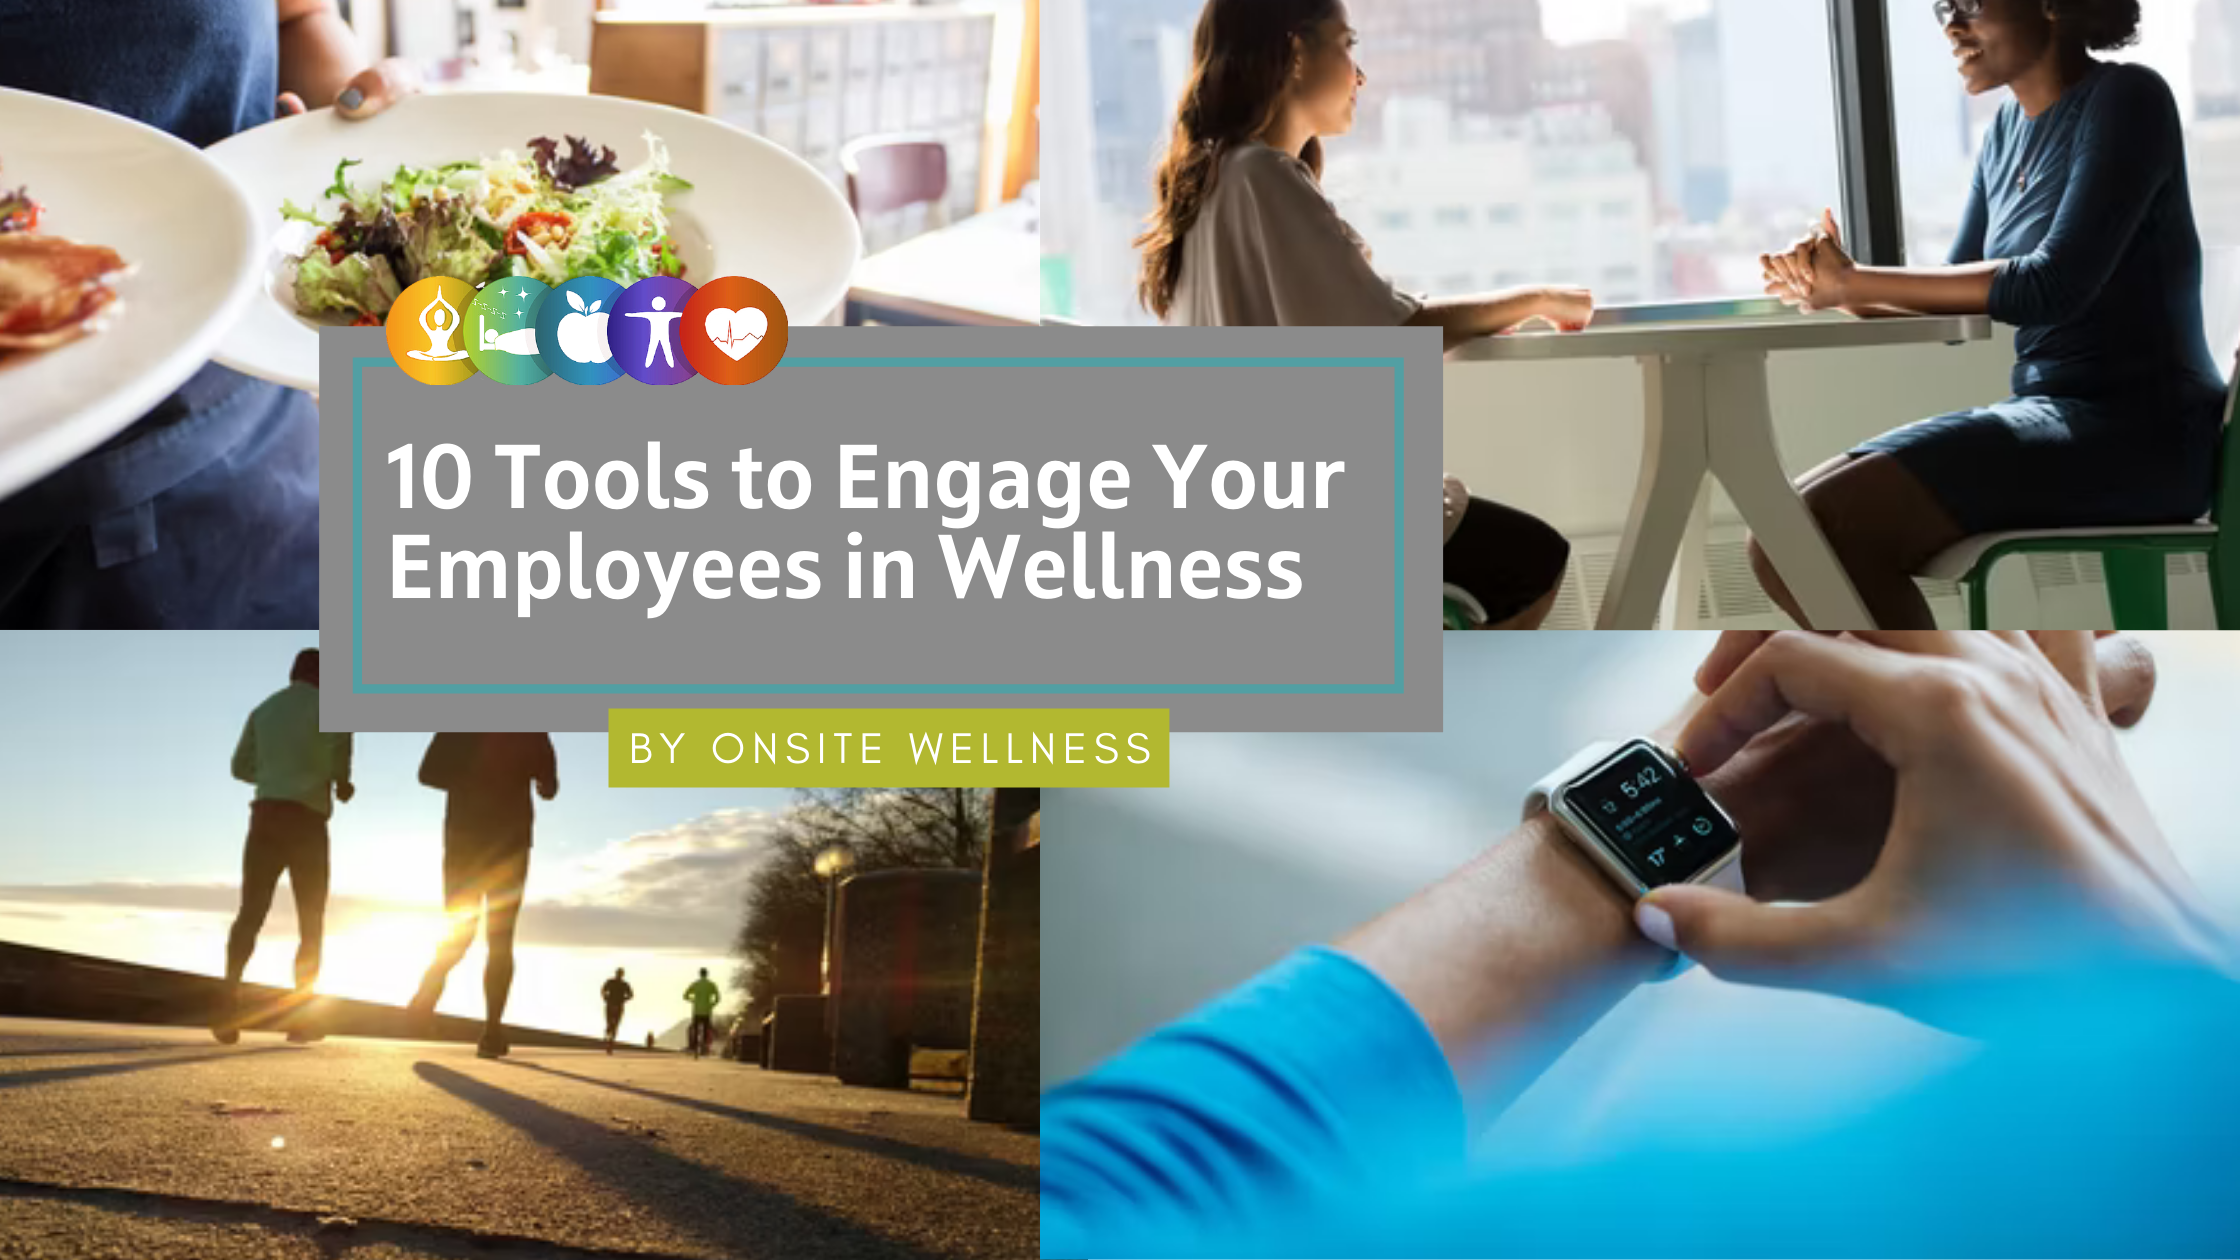 10 Tools to Engage Your Employees in Wellness